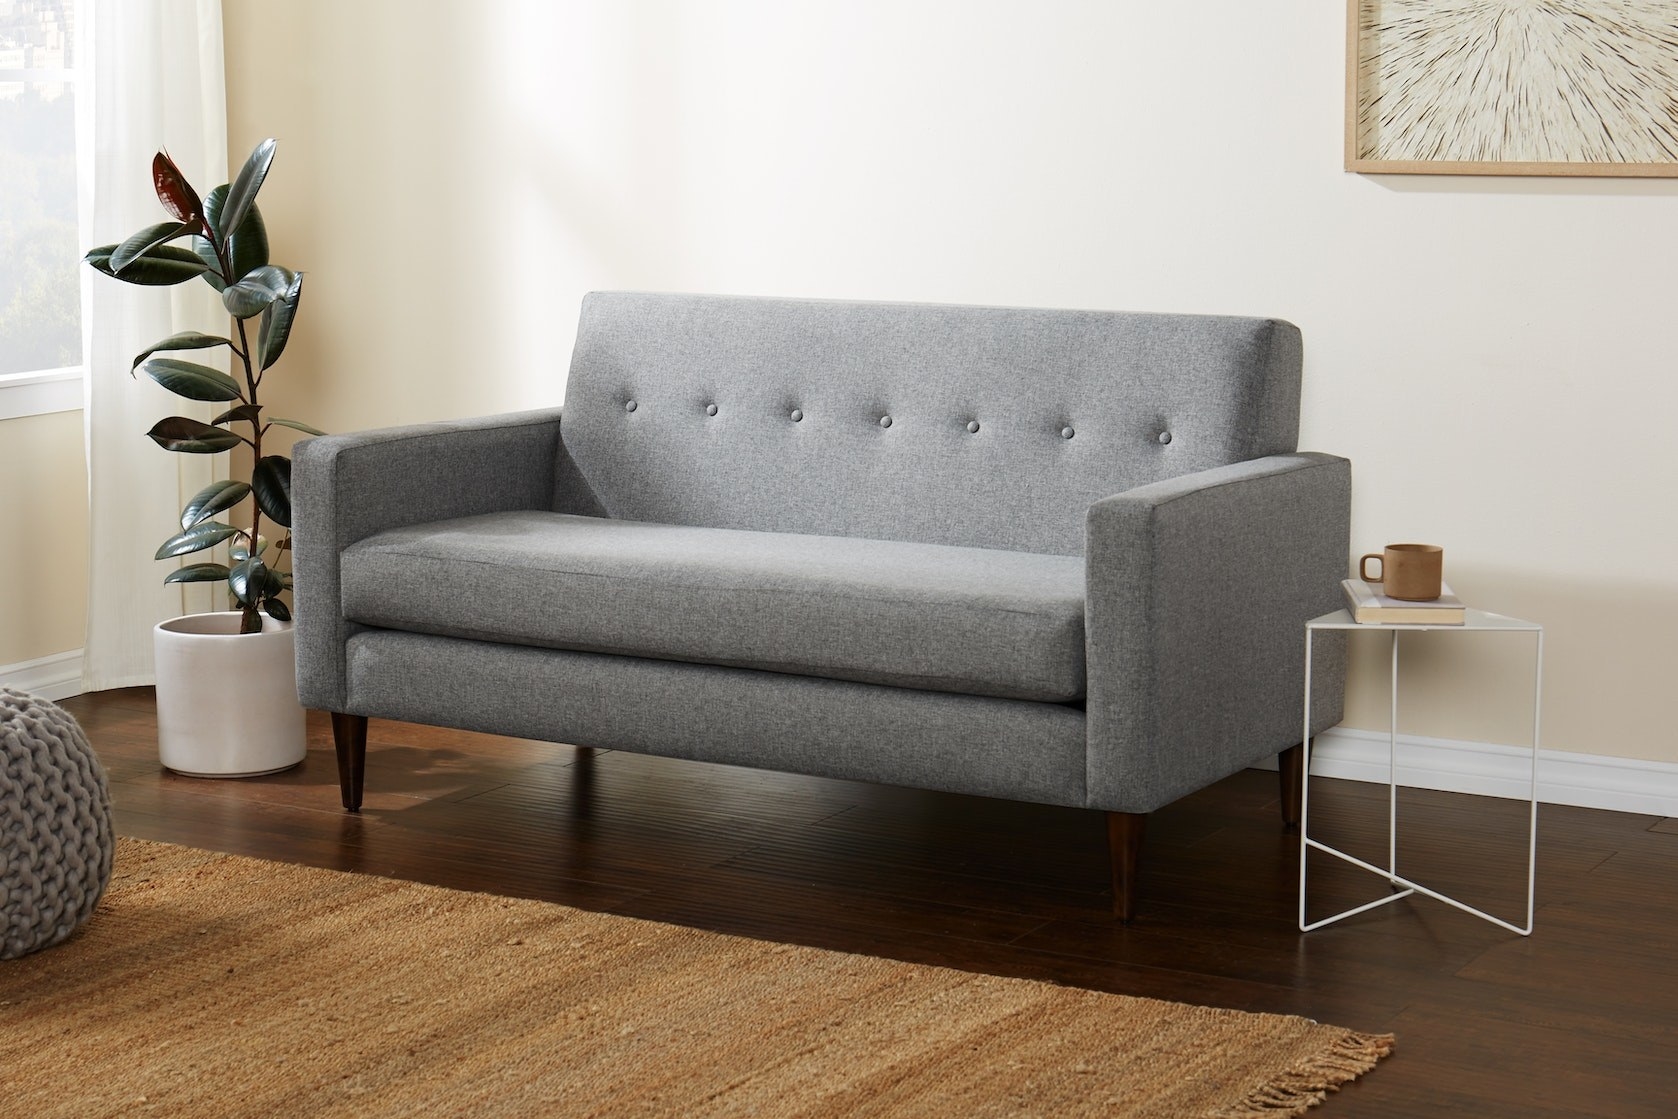 A small sofa is shown in a living room